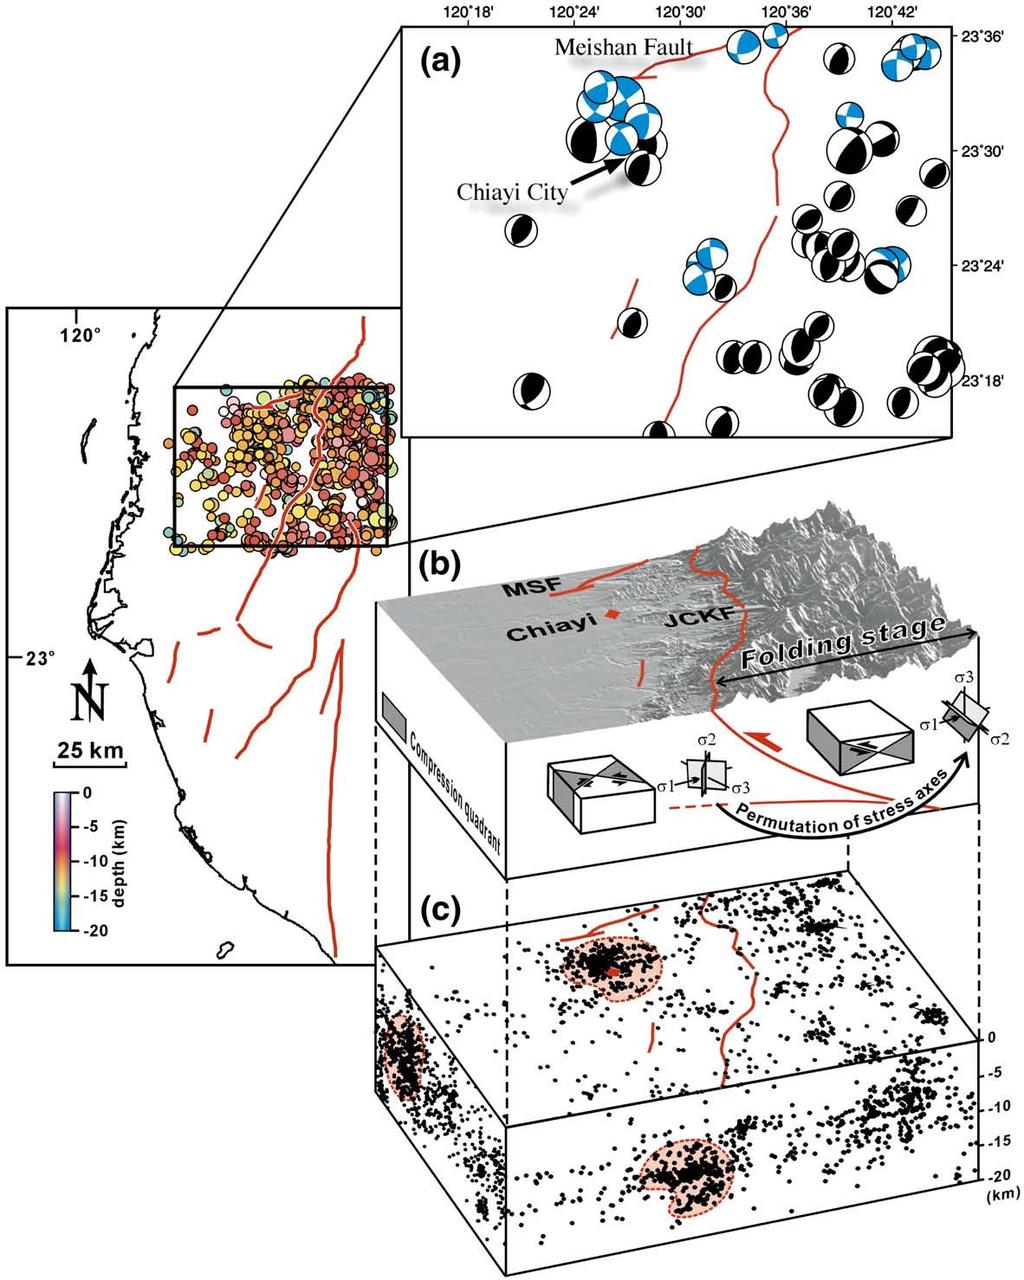 J.-Y. Yen et al. / Remote Sensing of Environment 112 (2008) 782 795 793 Fig. 7. Earthquakes near Chiayi City and tectonic explanation of deformation pattern.